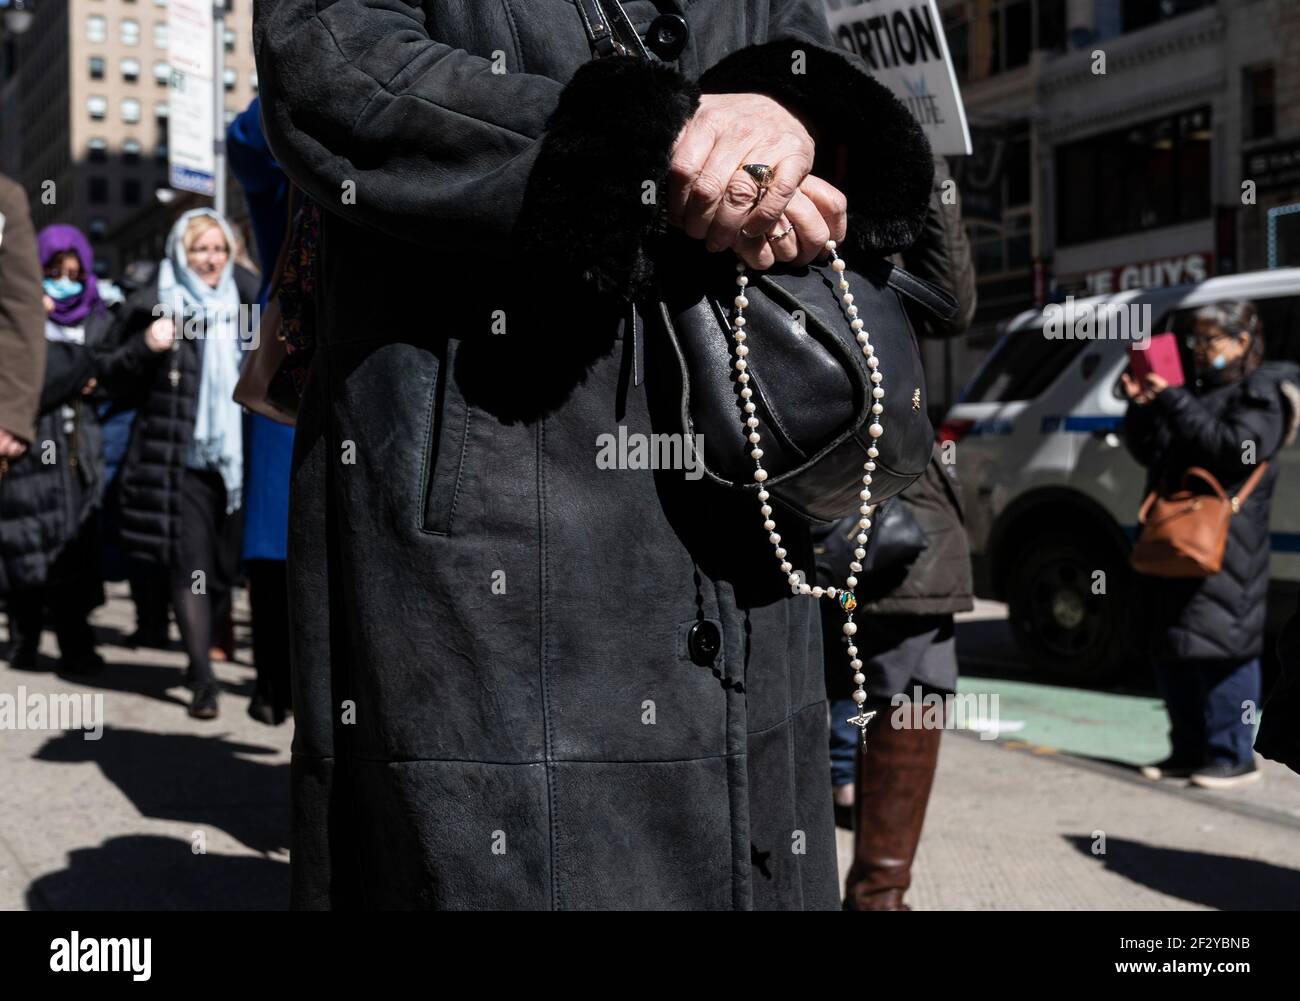 New York, NY - March 13, 2021: Clergy and members of Roman Catholic Church The Holy Innocents march and pray to end abortion on Midtown streets Stock Photo